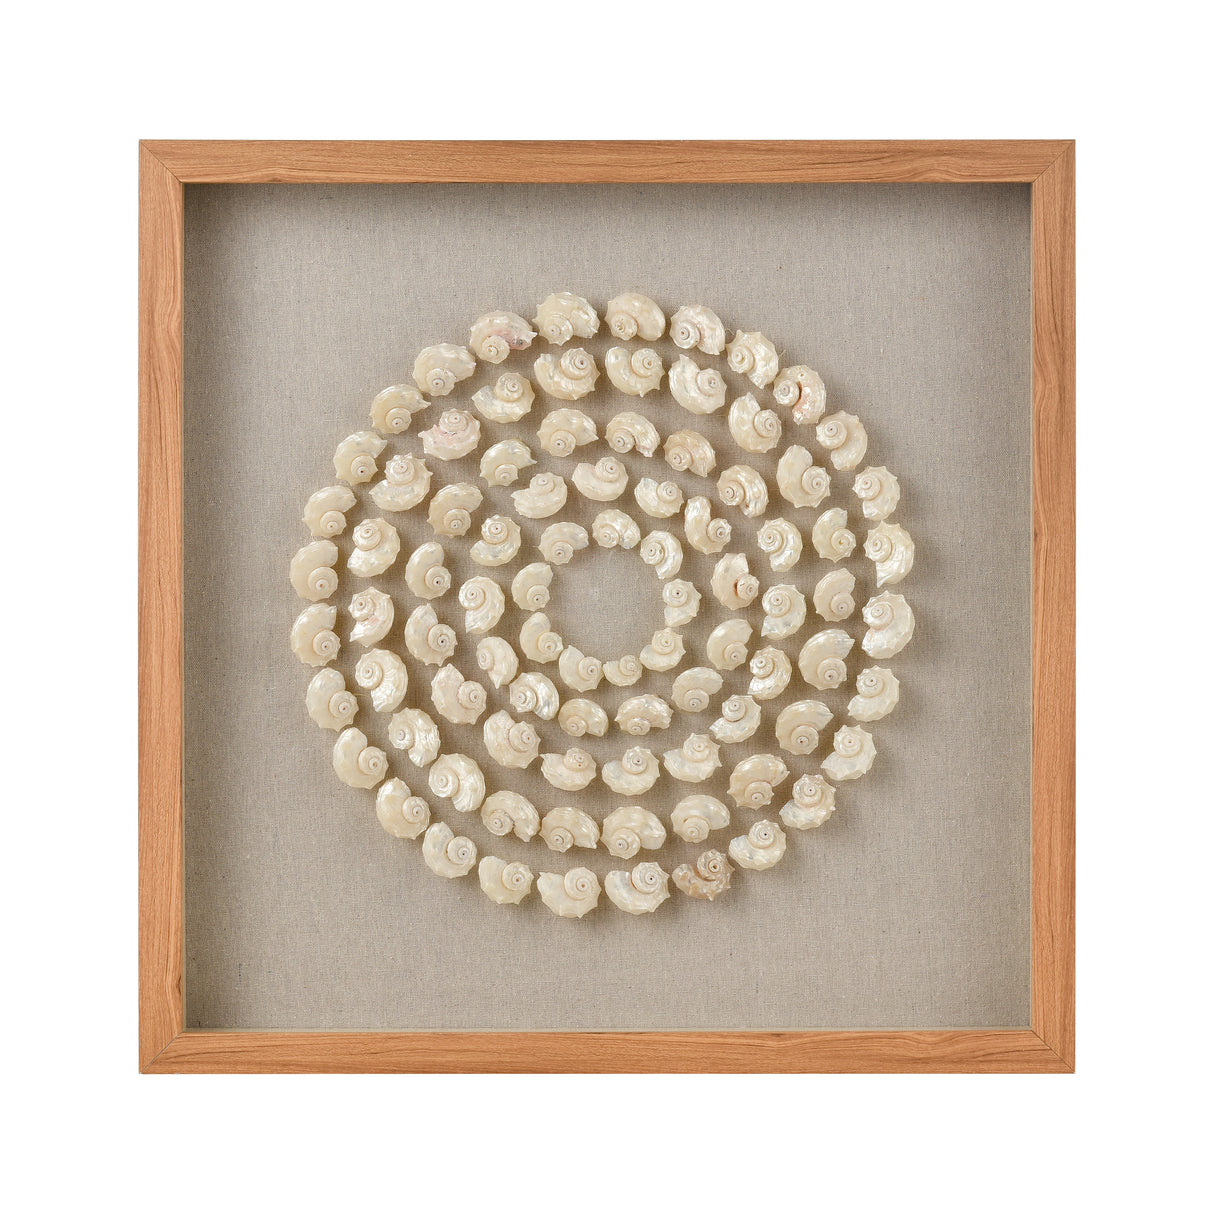 Elk S0036-11263 Concentric Shell Dimensional Wall Art